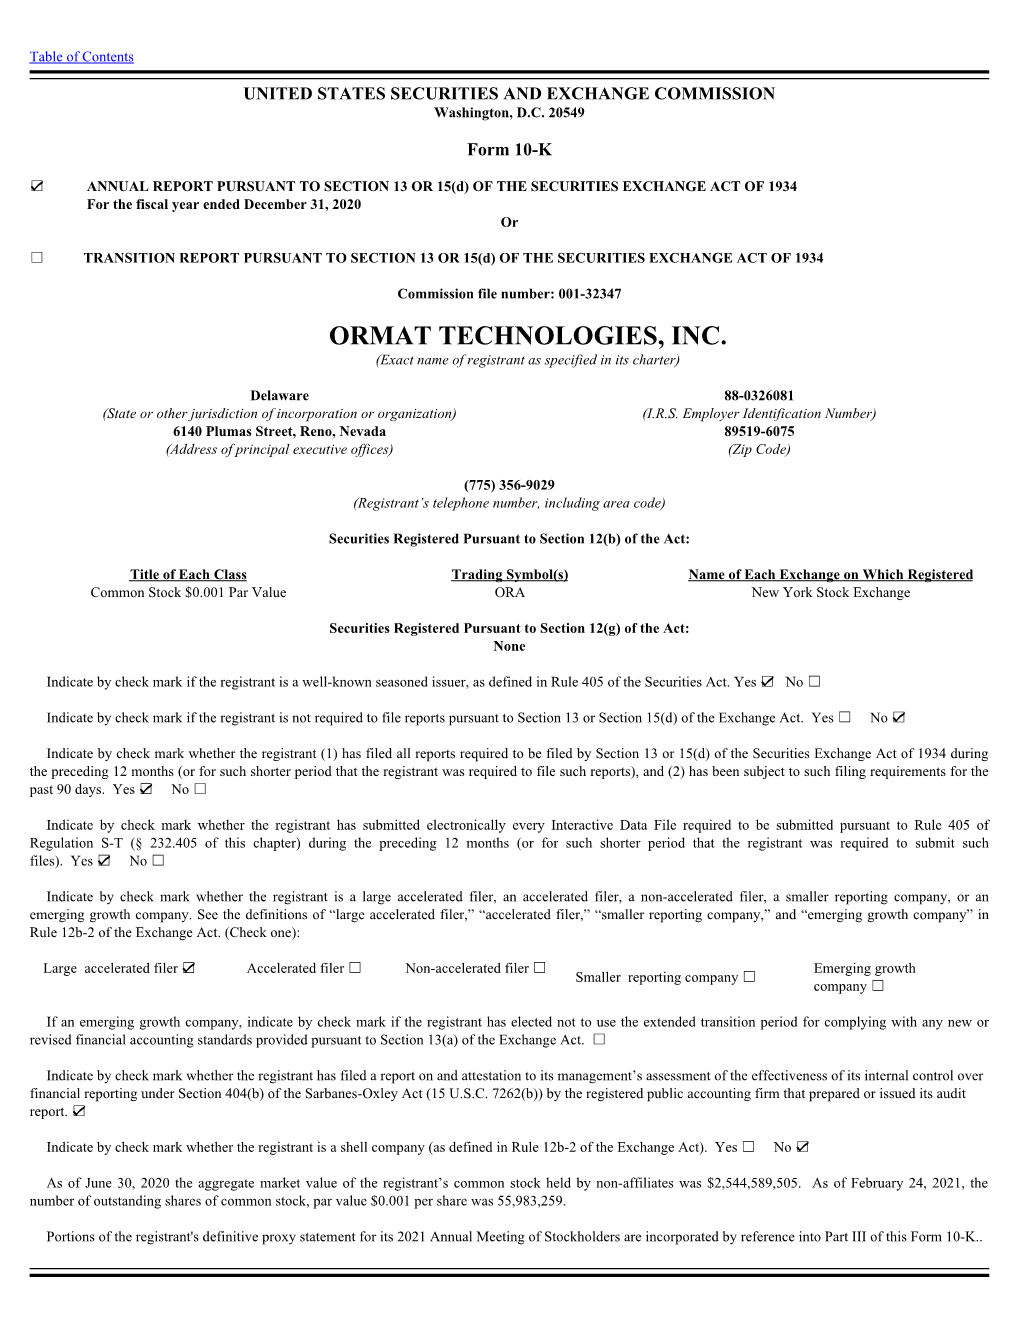 ORMAT TECHNOLOGIES, INC. (Exact Name of Registrant As Specified in Its Charter)